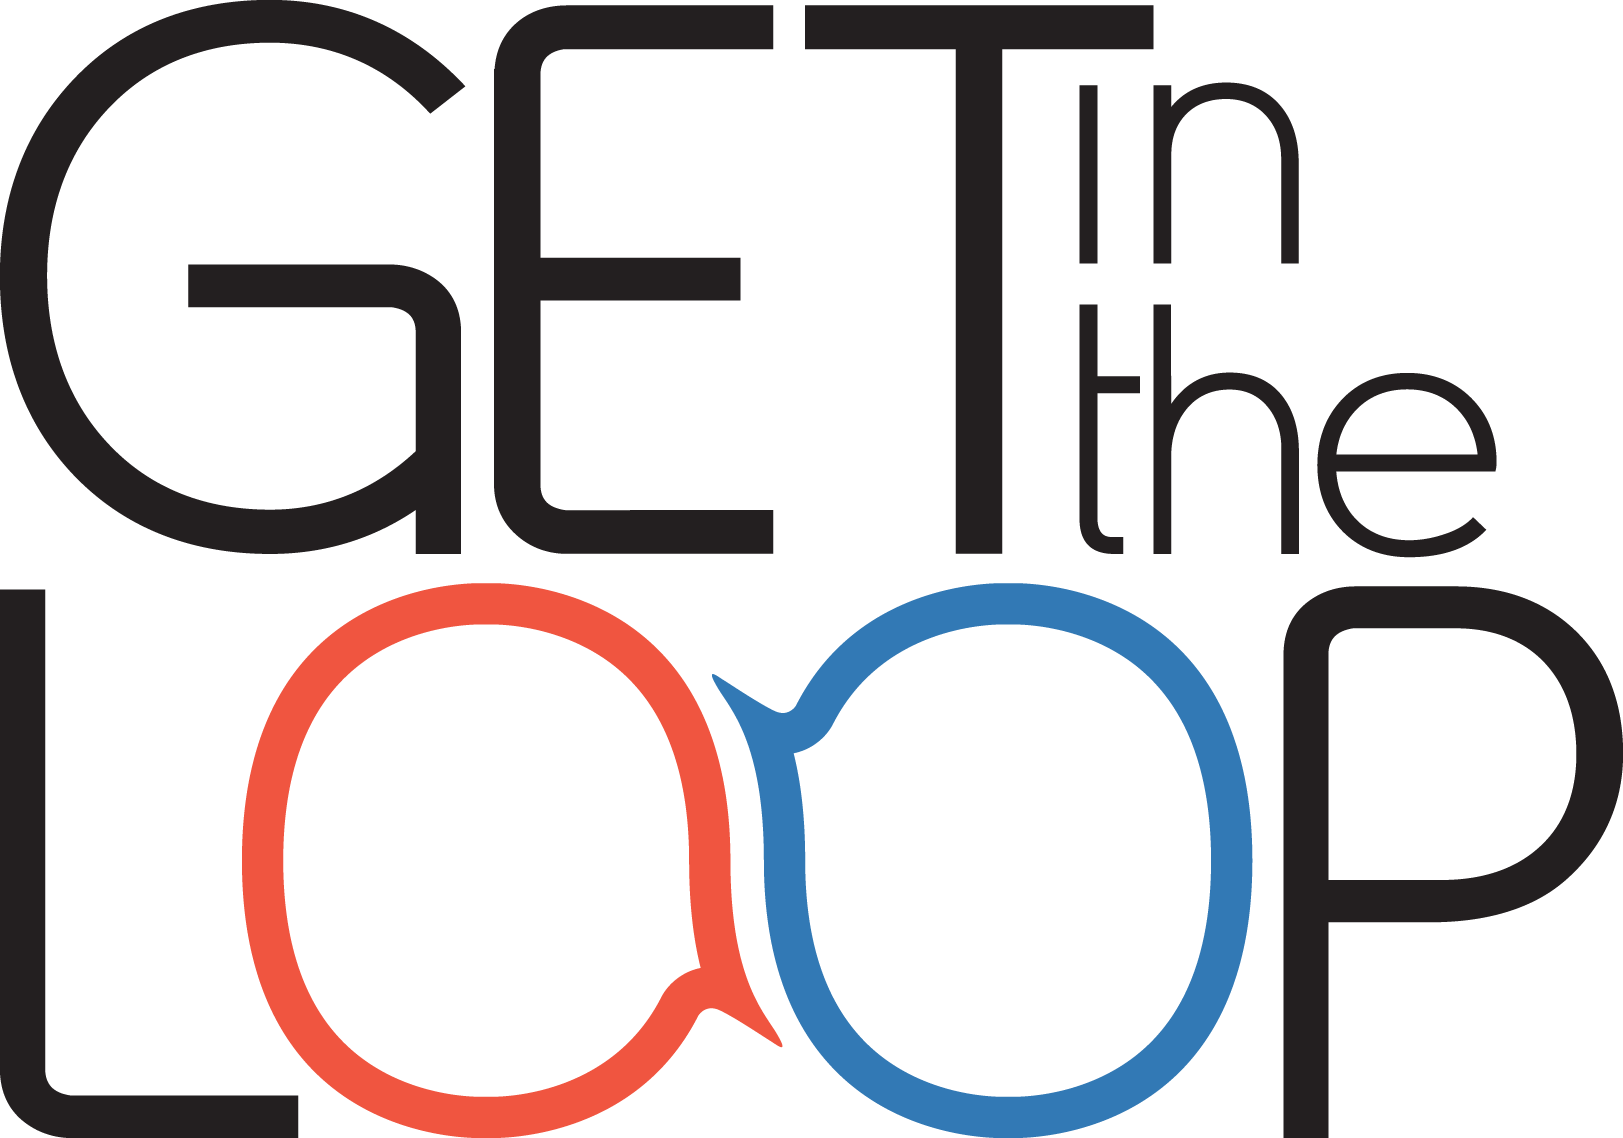 Get In The Loop Joins Talk To The Experts On Jan - Get In The Loop (1623x1138)